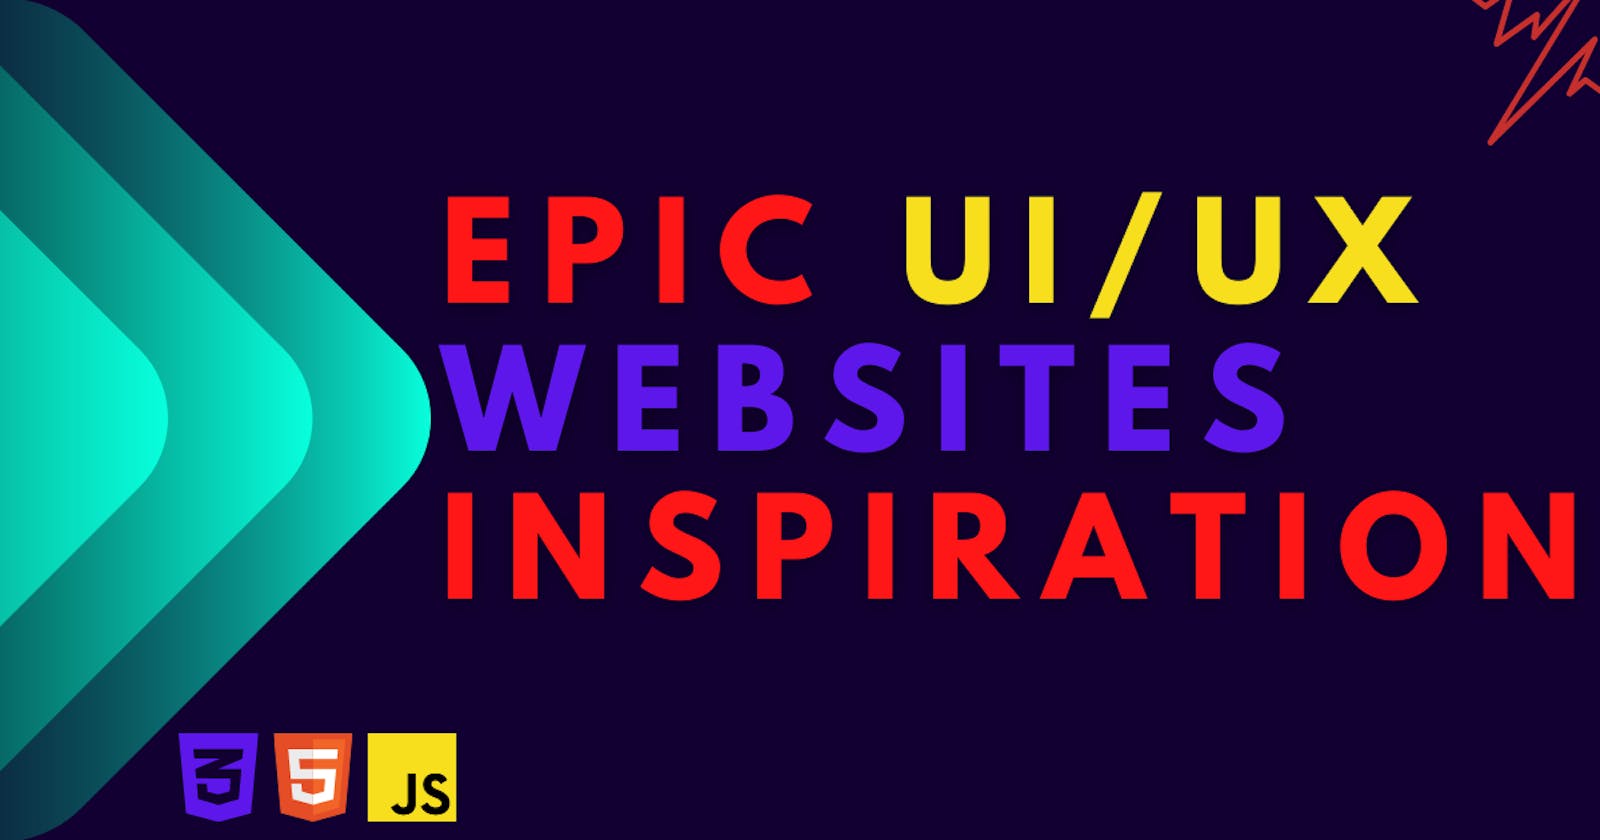 UI/UX inspiration from these epic websites